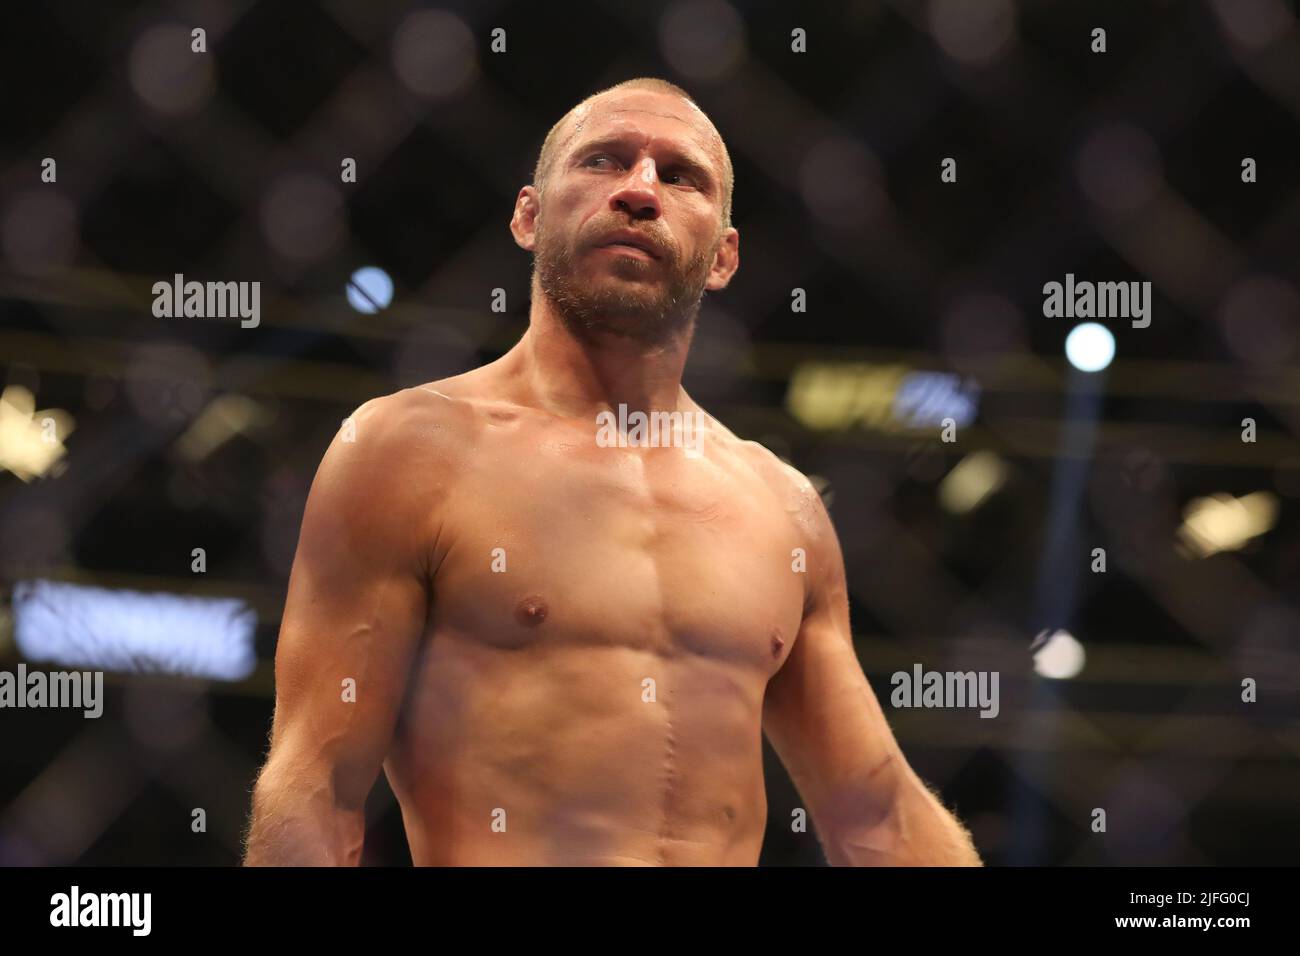 LAS VEGAS, NV - JULY 2: Donald Cerrone during the UFC 276 event at the T-Mobile Arena on July 2, 2022 in Las Vegas, Nevada, United States. (Photo by Alejandro Salazar/PxImages) Stock Photo